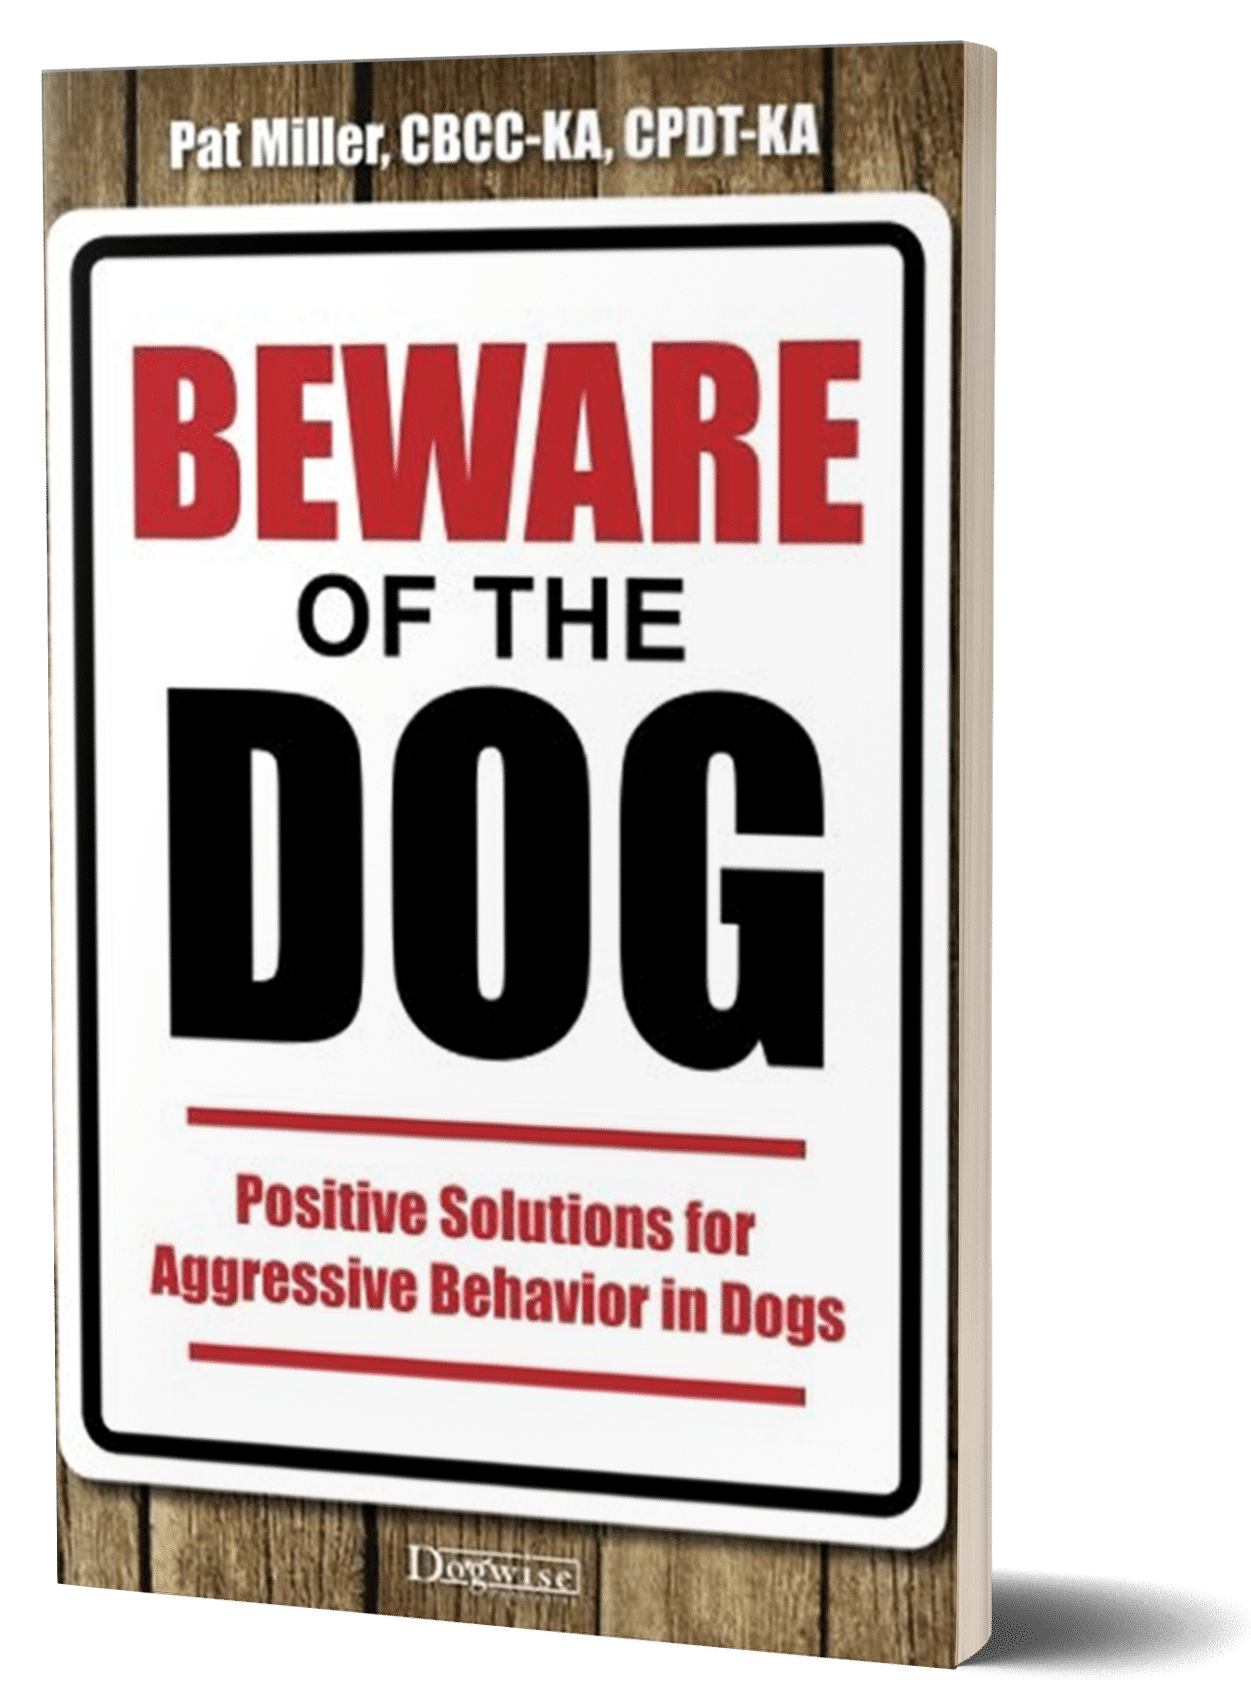 beware of the dog book cover